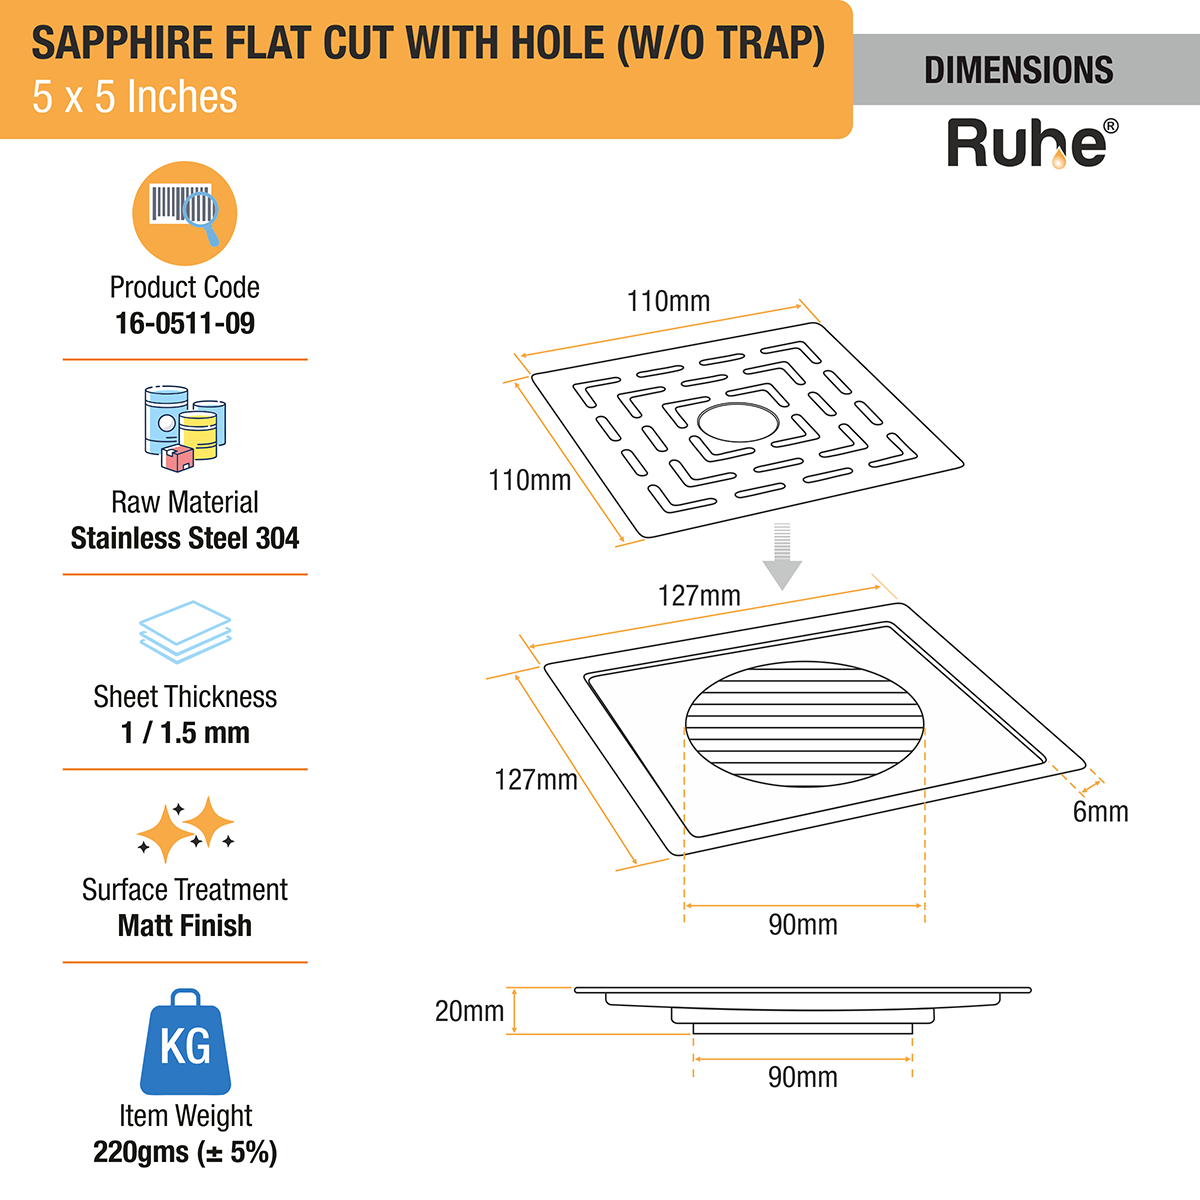 Sapphire Square Flat Cut 304-Grade Floor Drain with Hole (5 x 5 Inches) dimensions and sizes